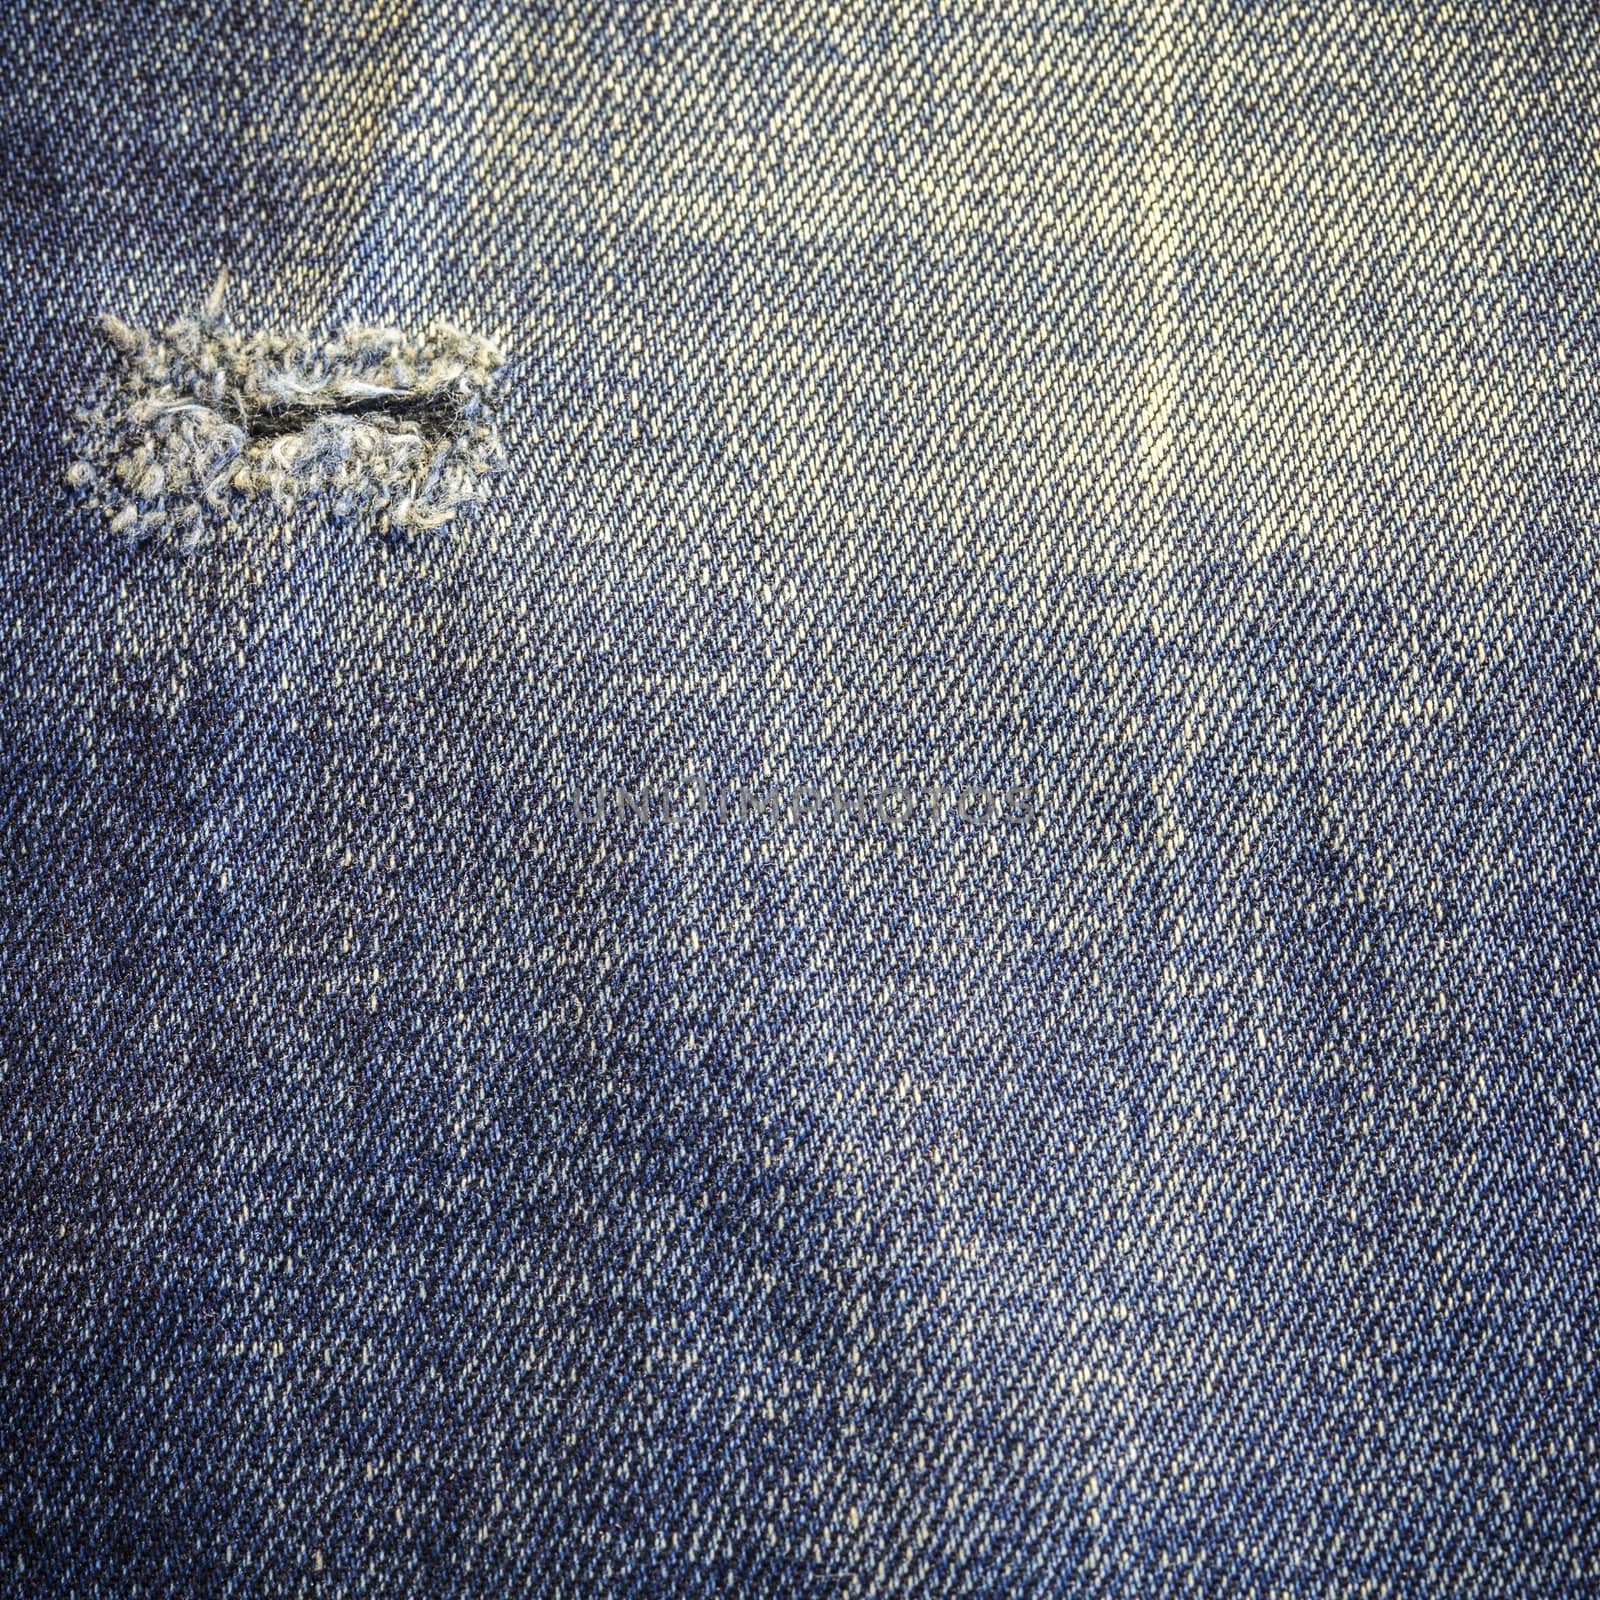 Jeans Texture Background by 2nix